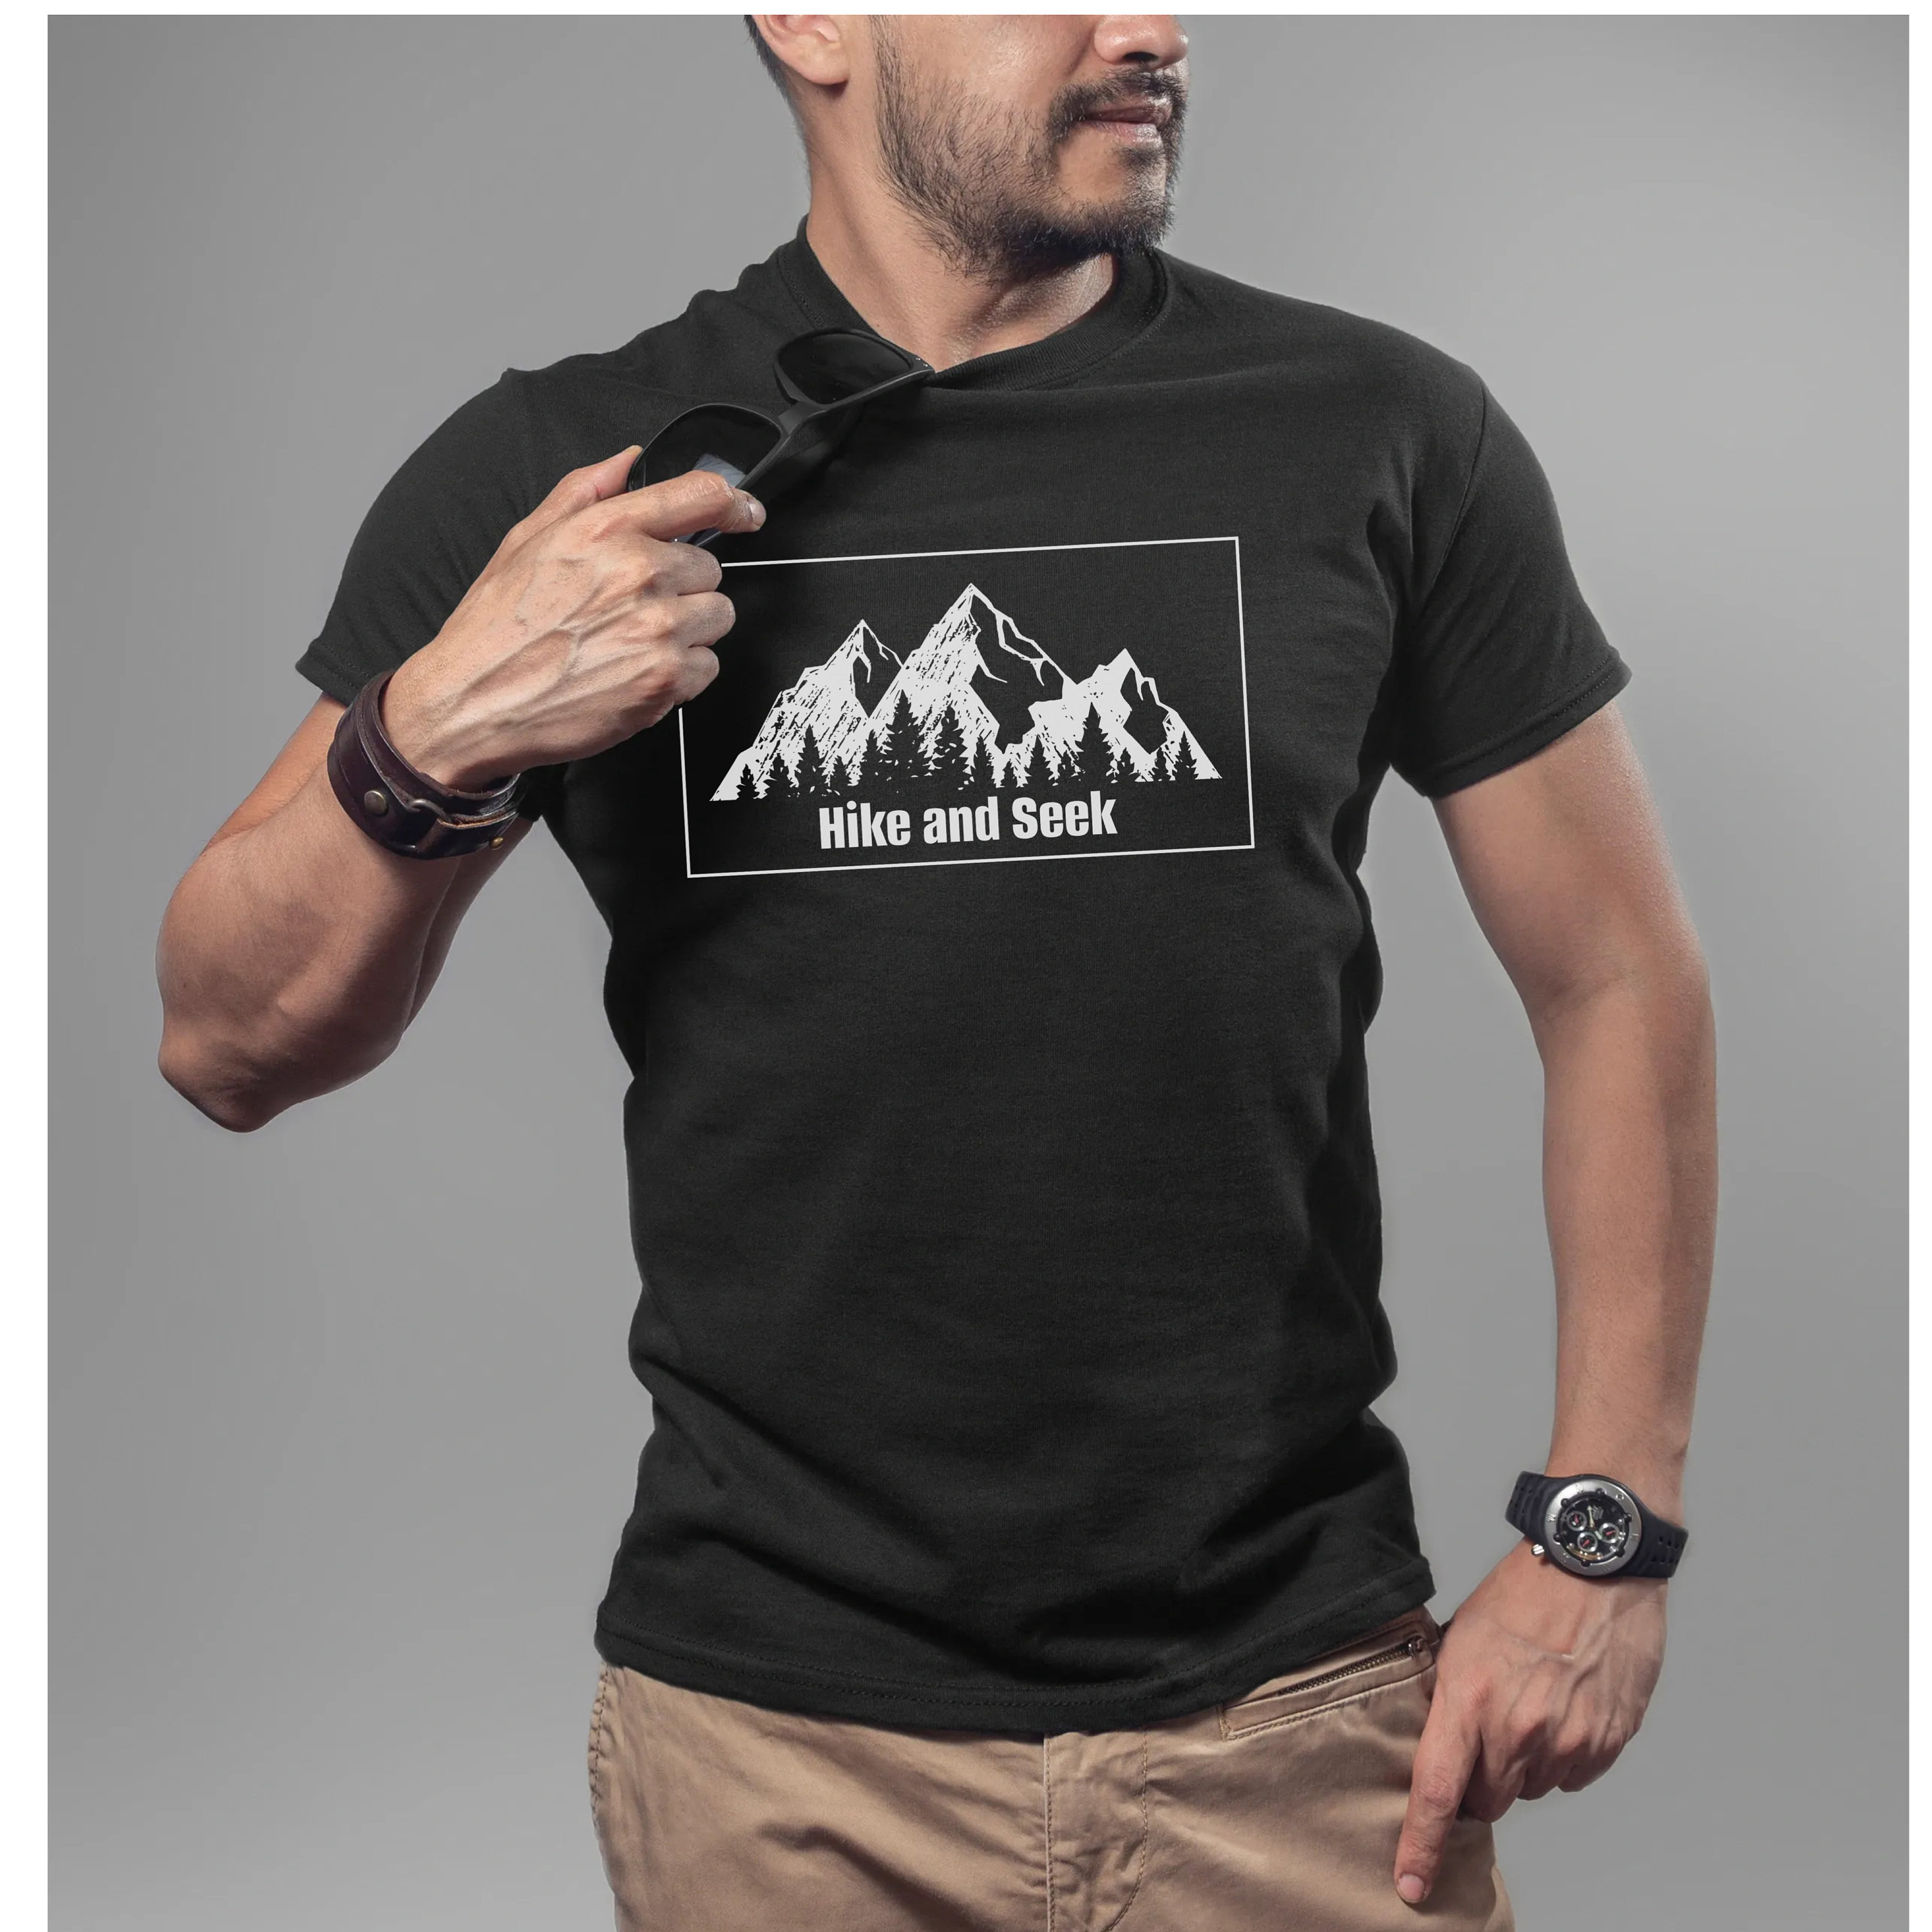 What are hiking shirts?